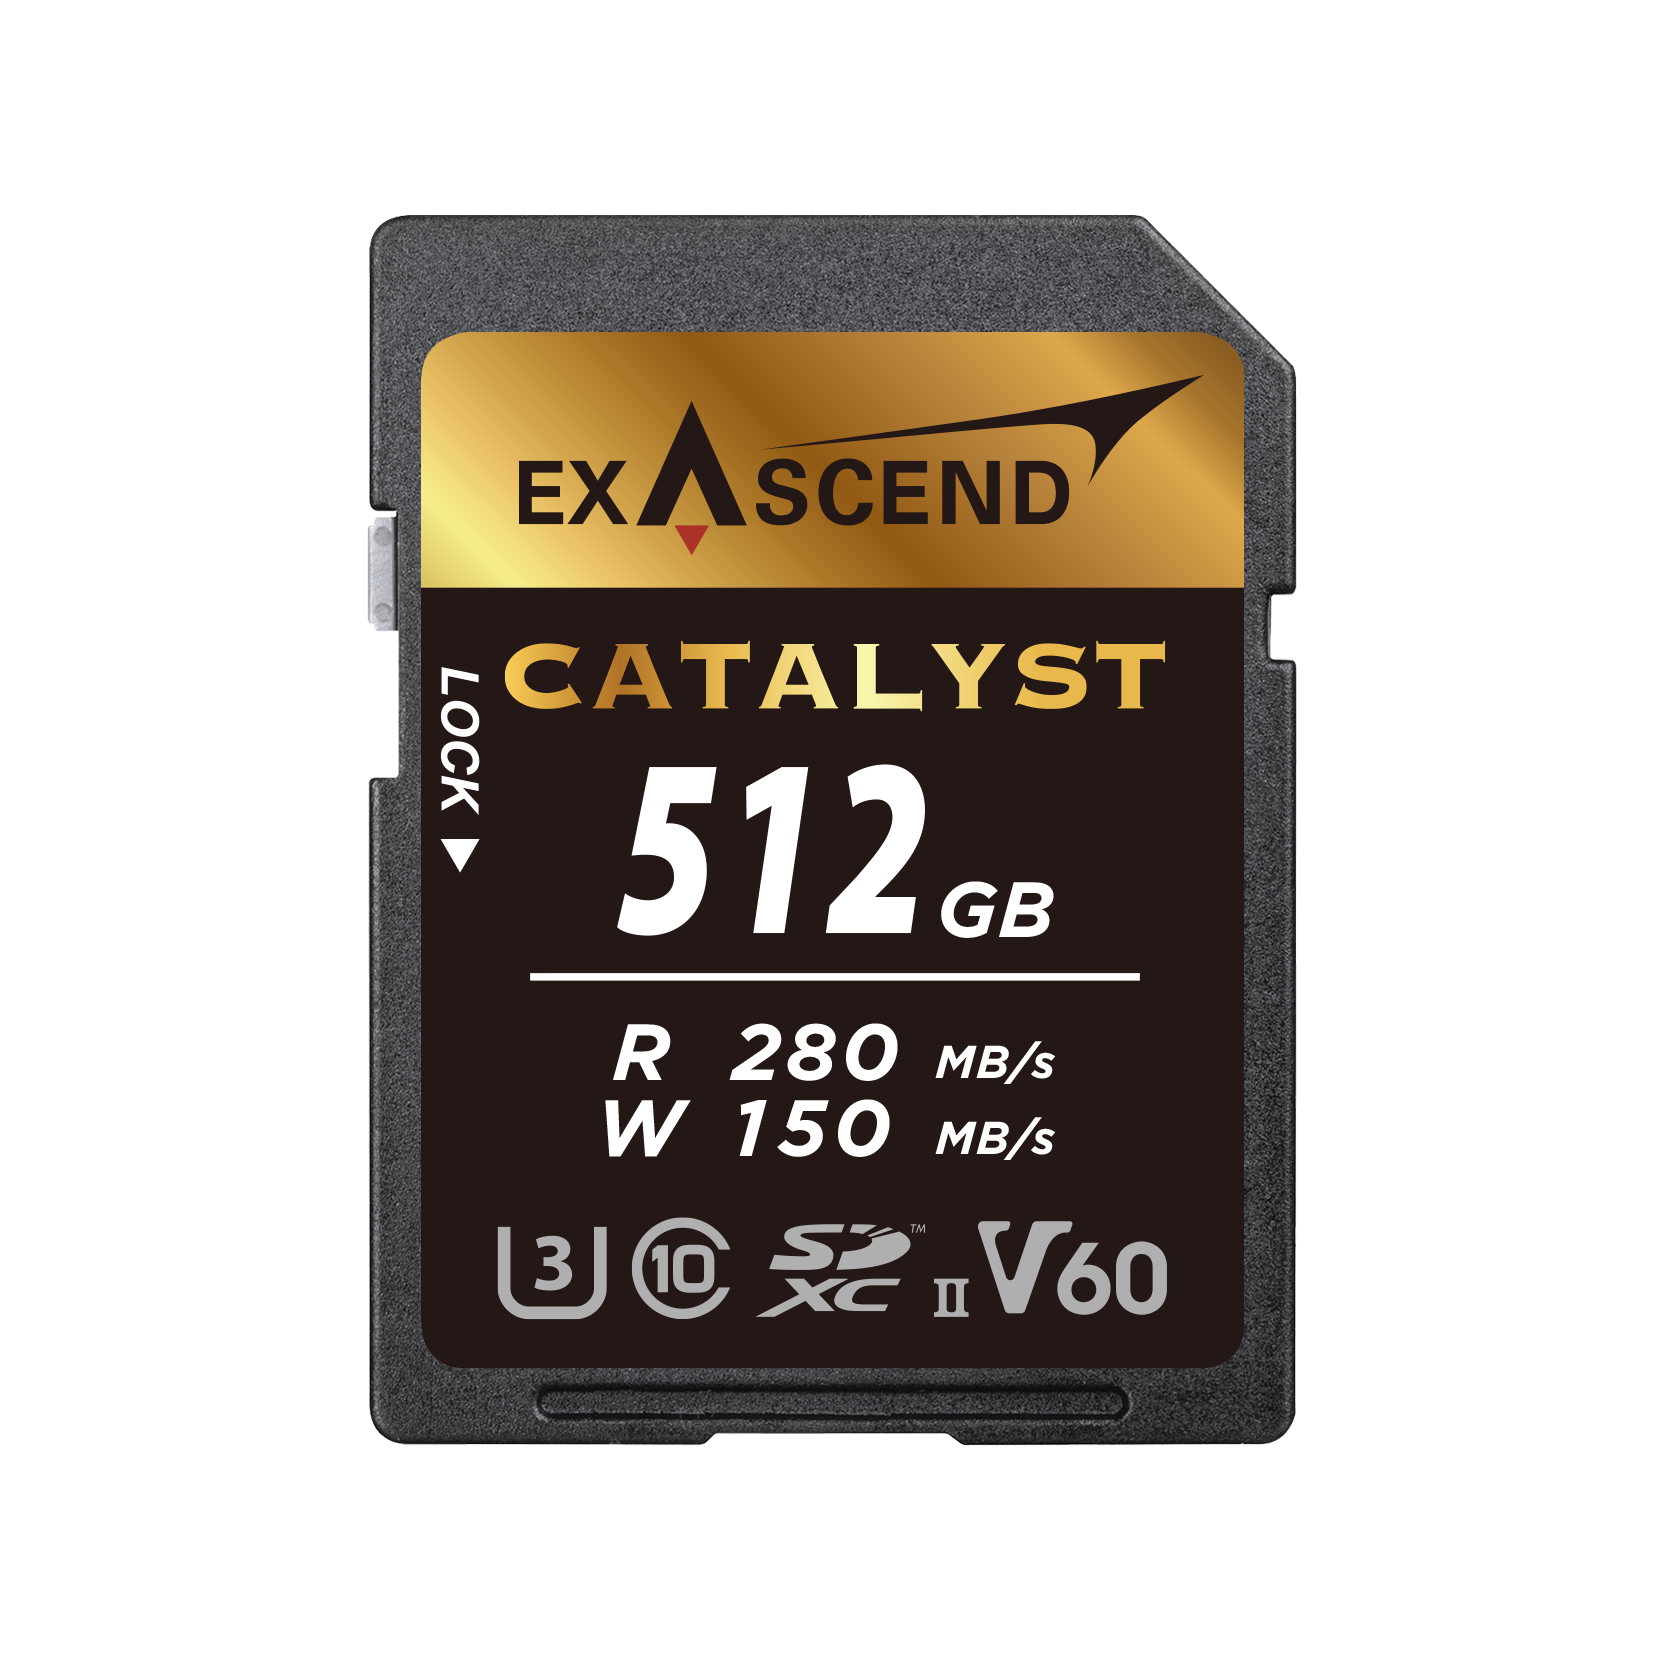 Catalyst V60 SD Card 512GB.png